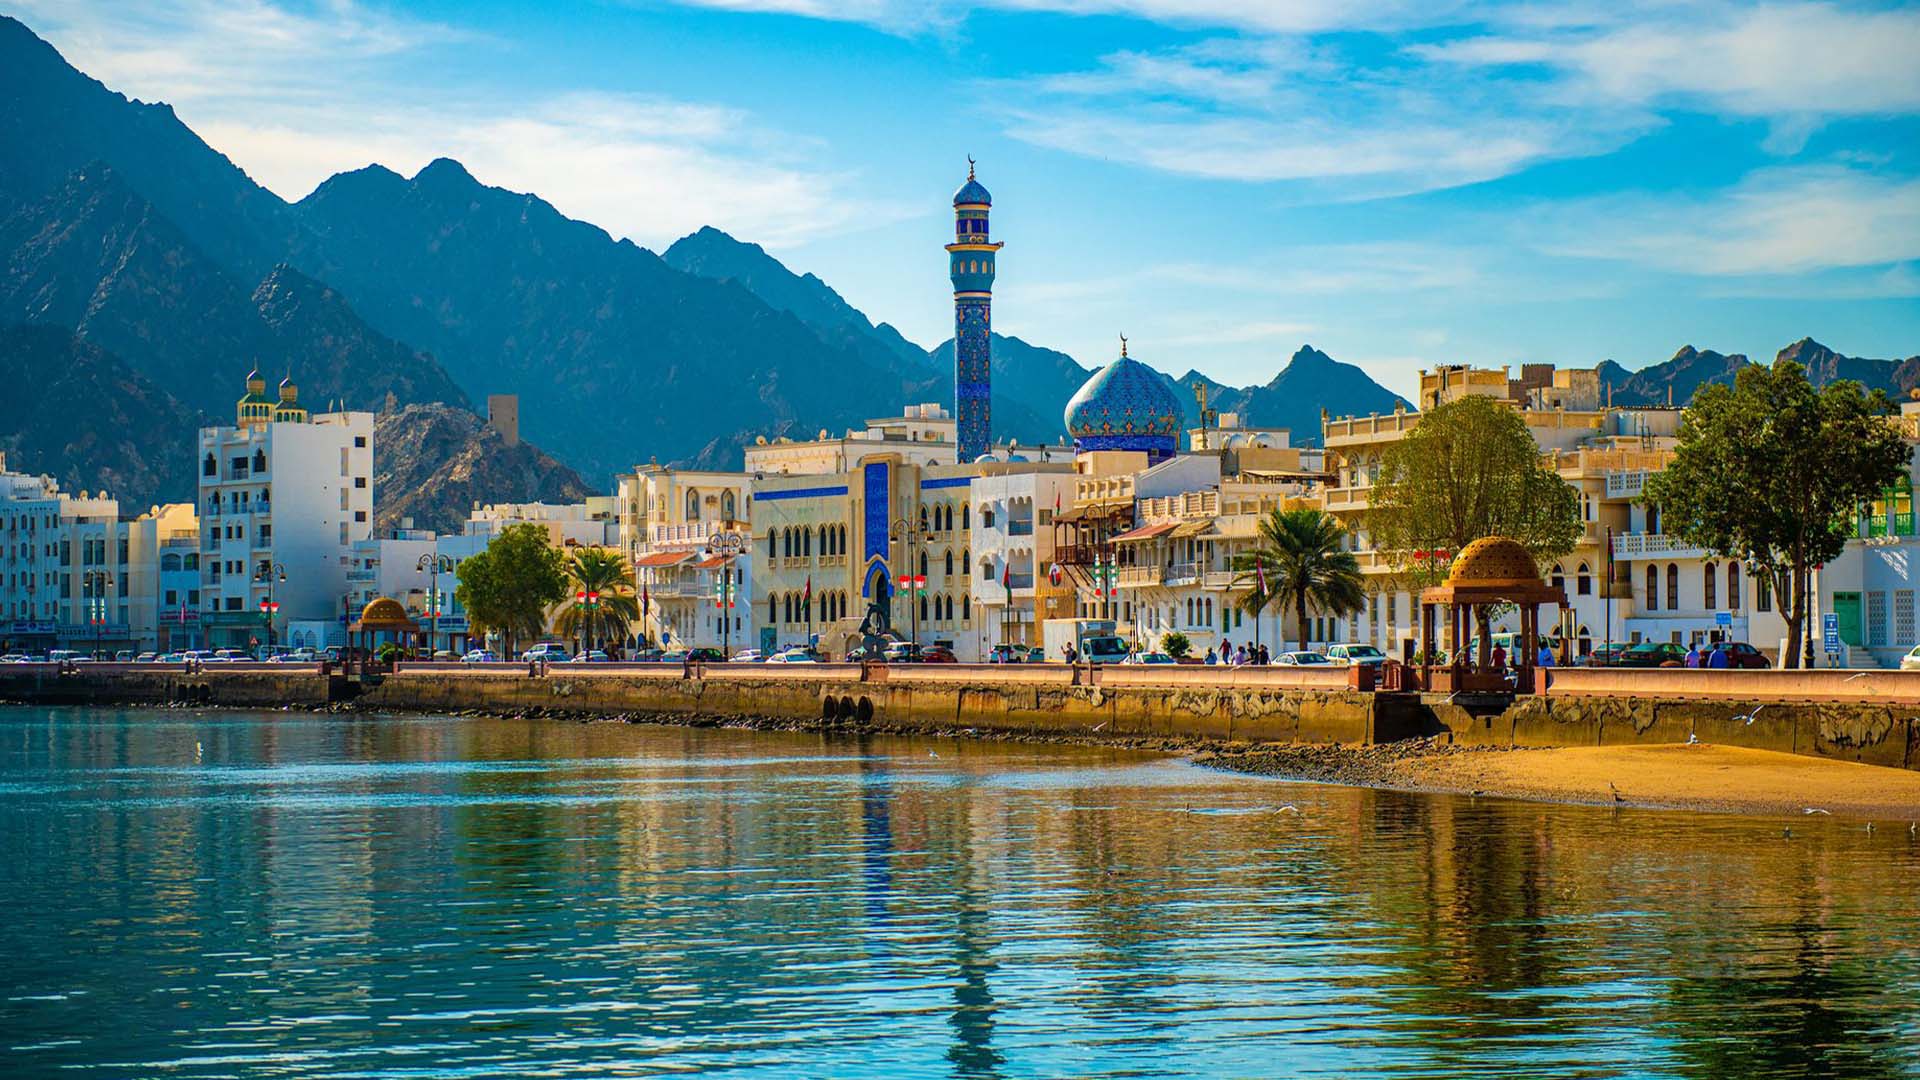 A panoramic photograph captures the stunning coastal front of Muscat, where a prominent mosque takes center stage amidst a backdrop of buildings, while a majestic mountain looms in the distance.